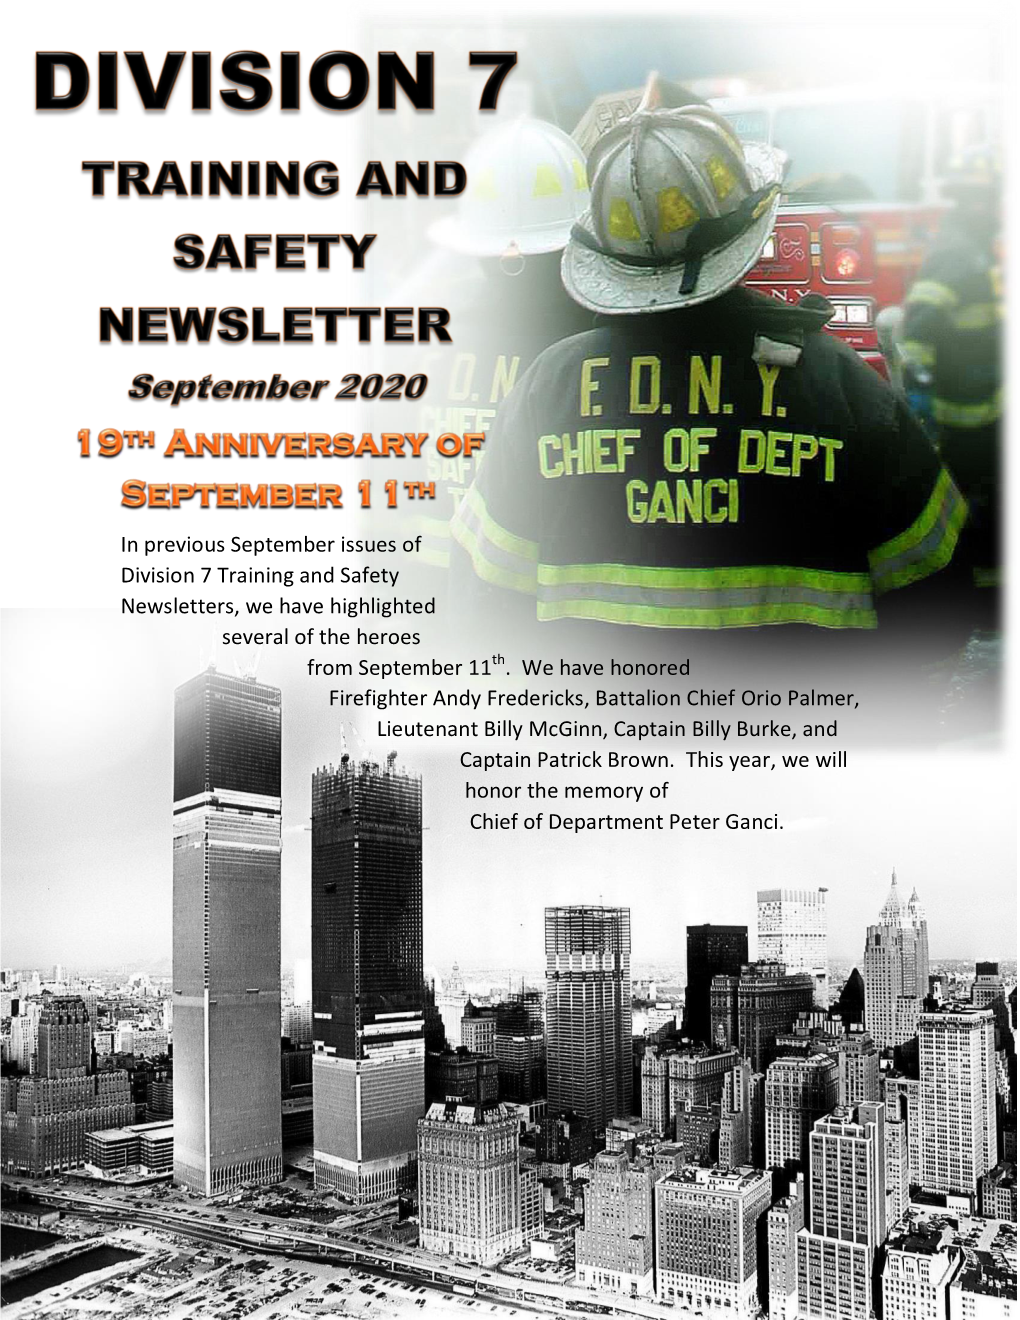 In Previous September Issues of Division 7 Training and Safety Newsletters, We Have Highlighted Several of the Heroes from September 11Th